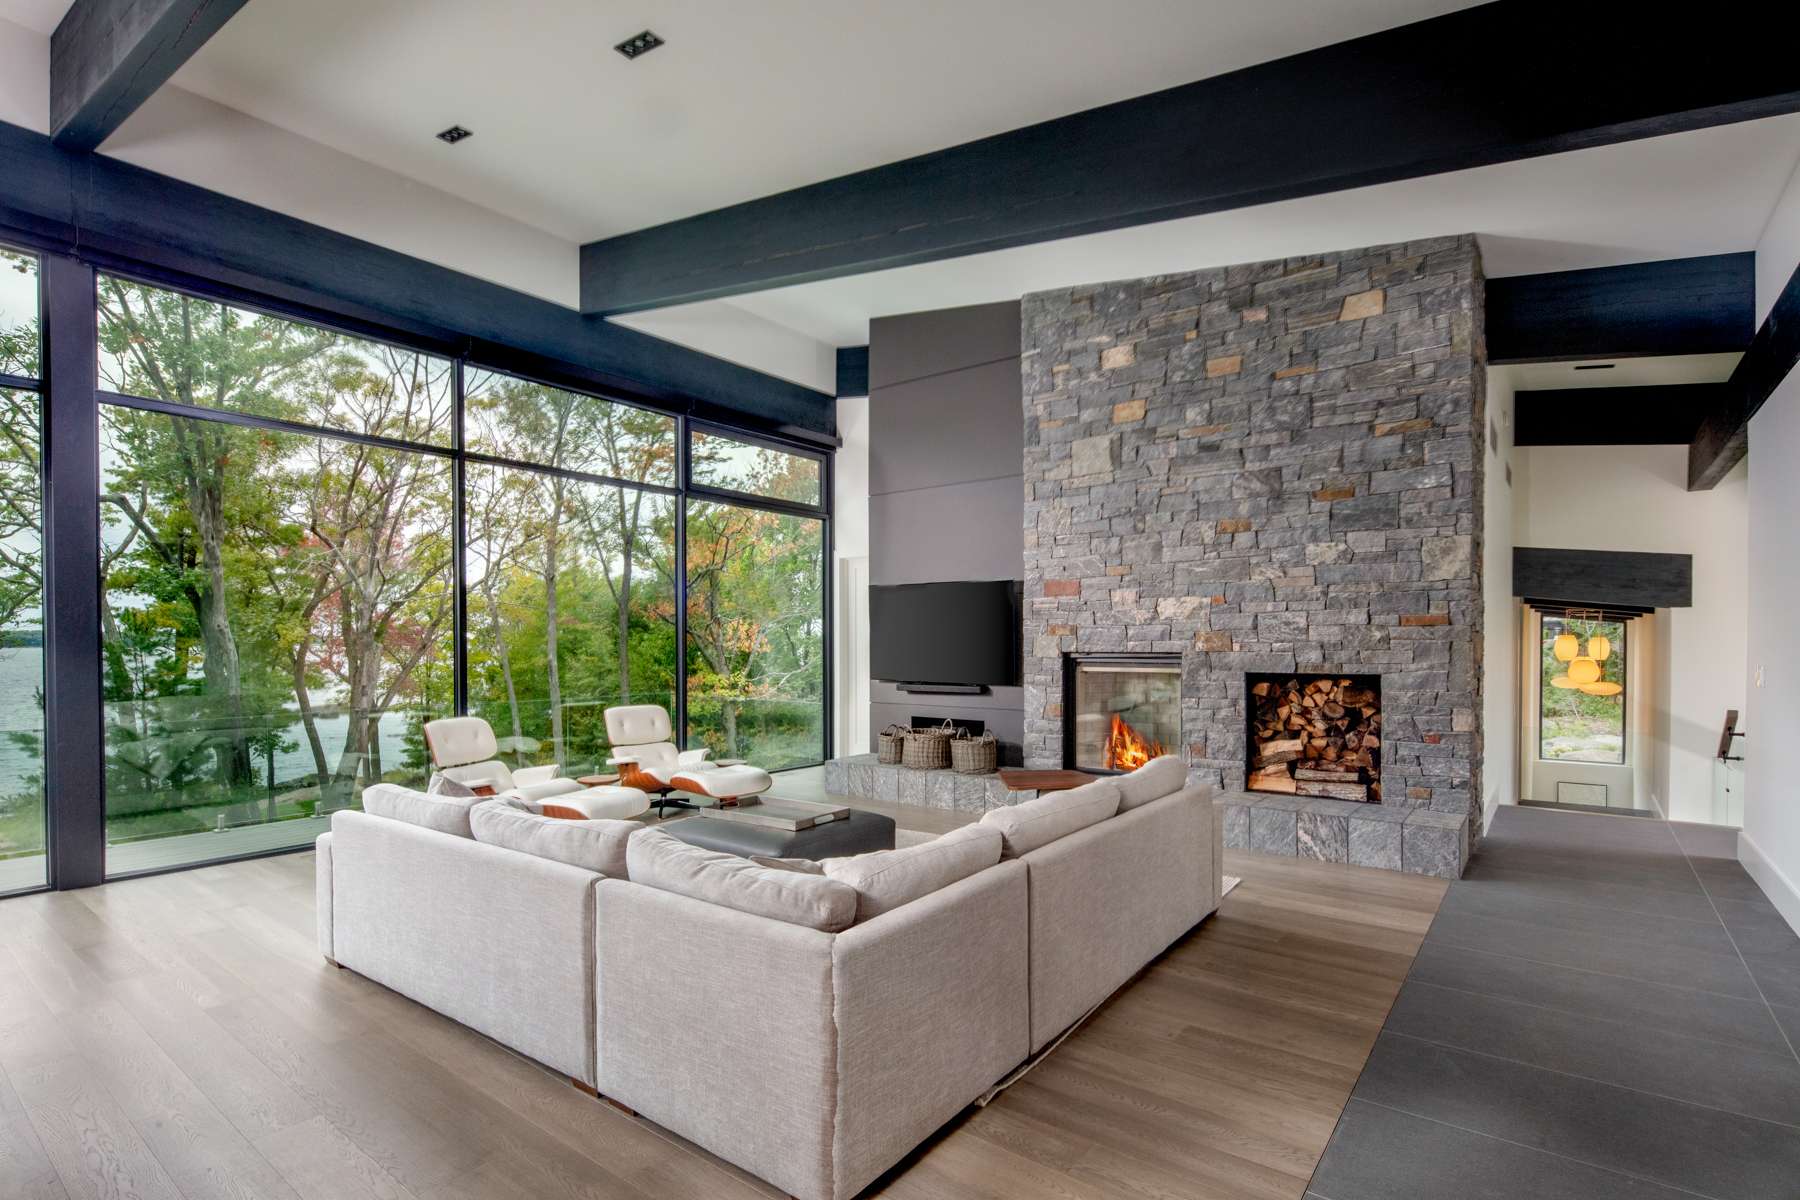 Living Space Area with fireplace | Ballantyne Builds